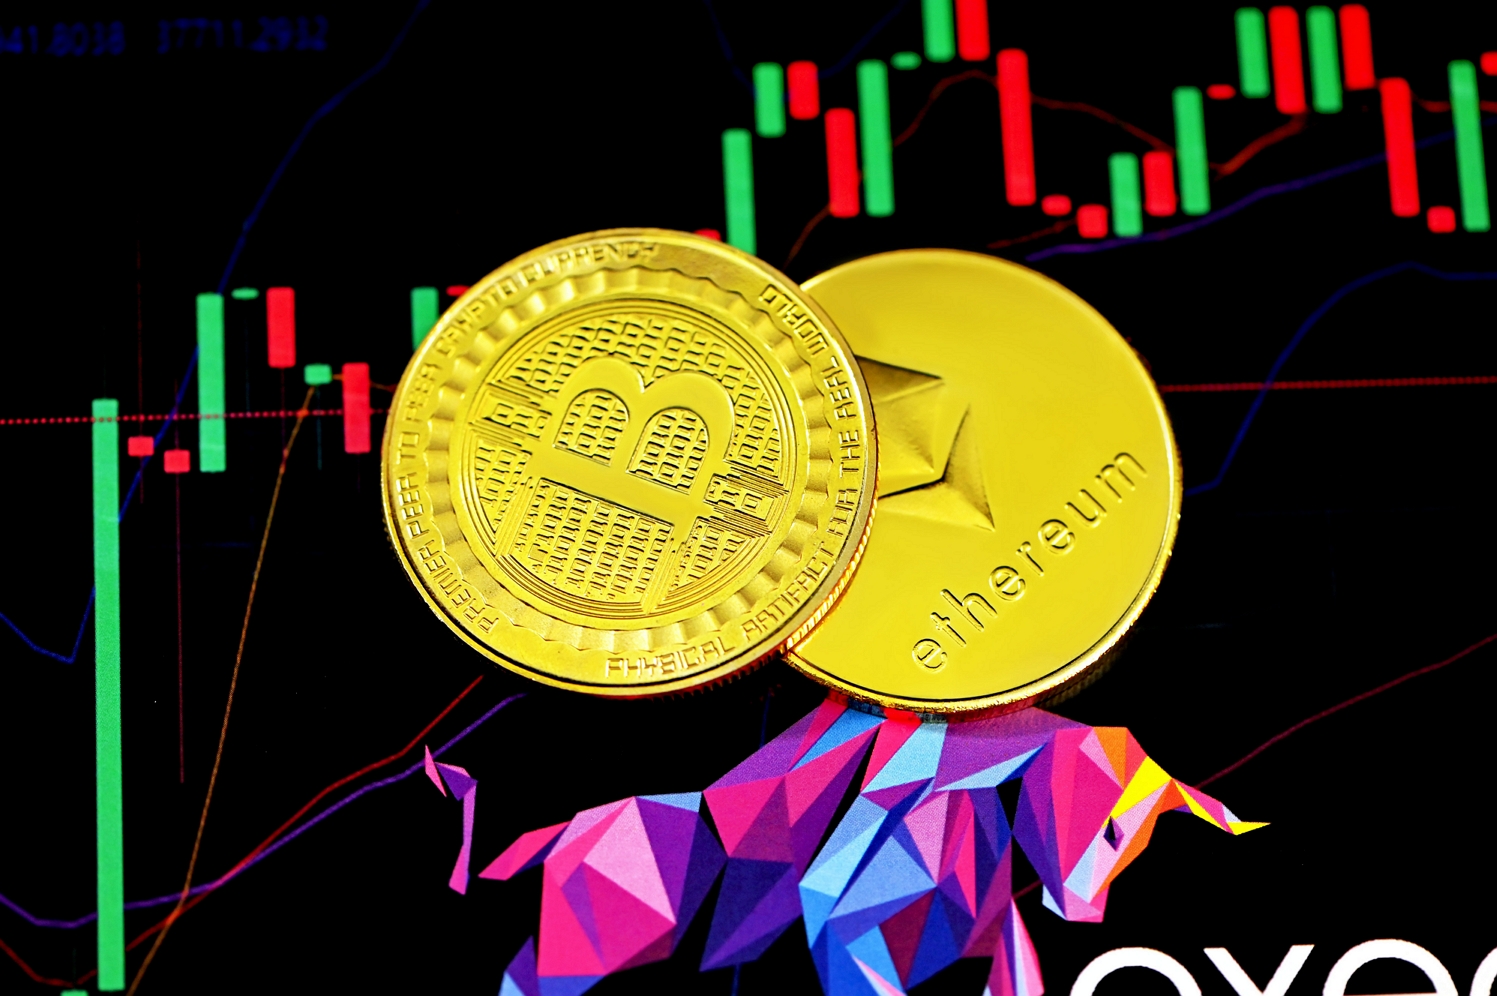 Bitcoin and Ethereum Gain Over 10 as Broader Crypto Market Bitcoin and Ethereum Gain Over 10% as Broader Crypto Market Recovers From Yesterday's Lows BlockBlog CoinCheckup